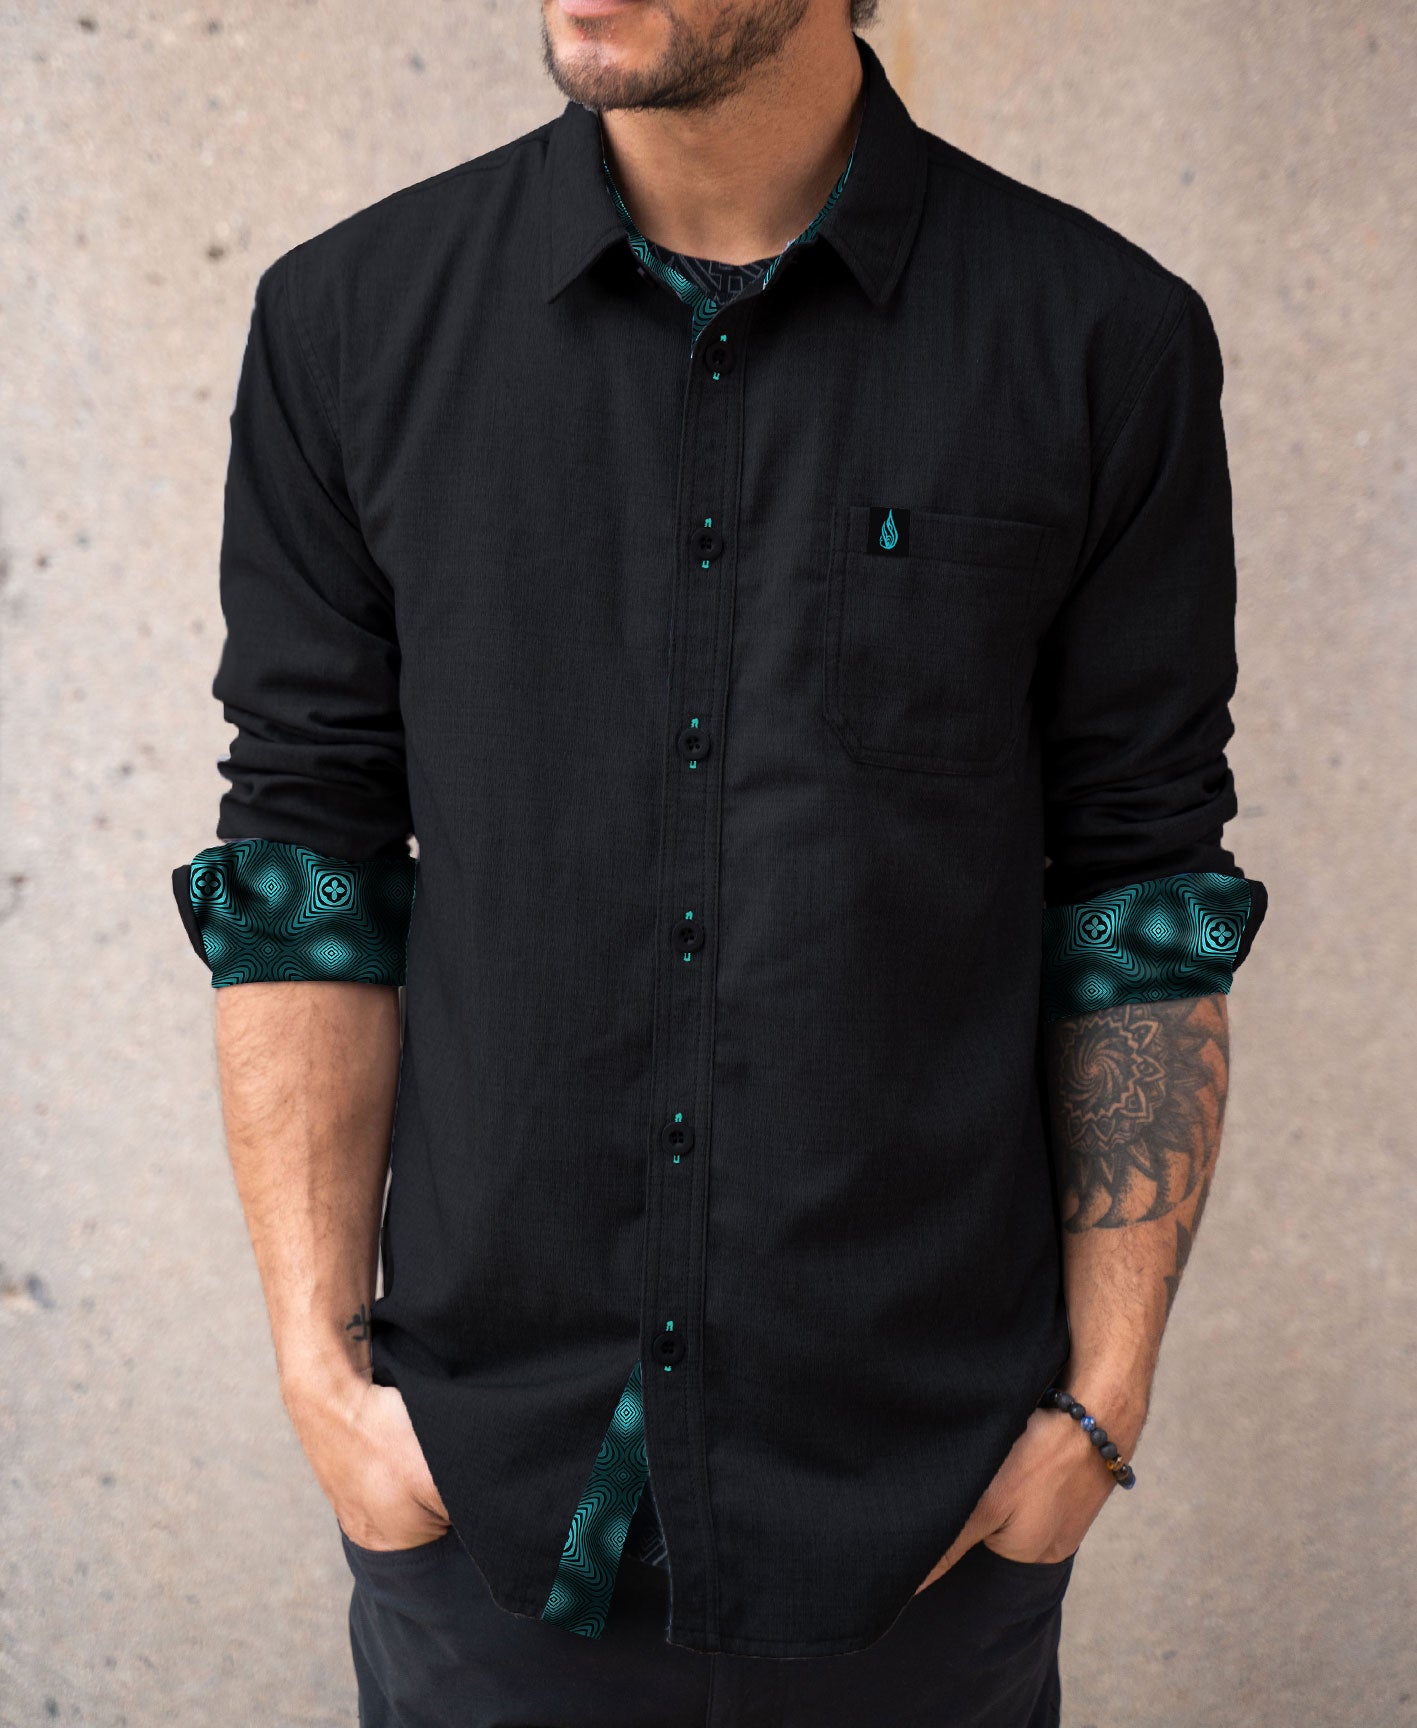 Evaporate Lined Button Down Shirt by Threyda - Exclusive Presale SHIPS APRIL